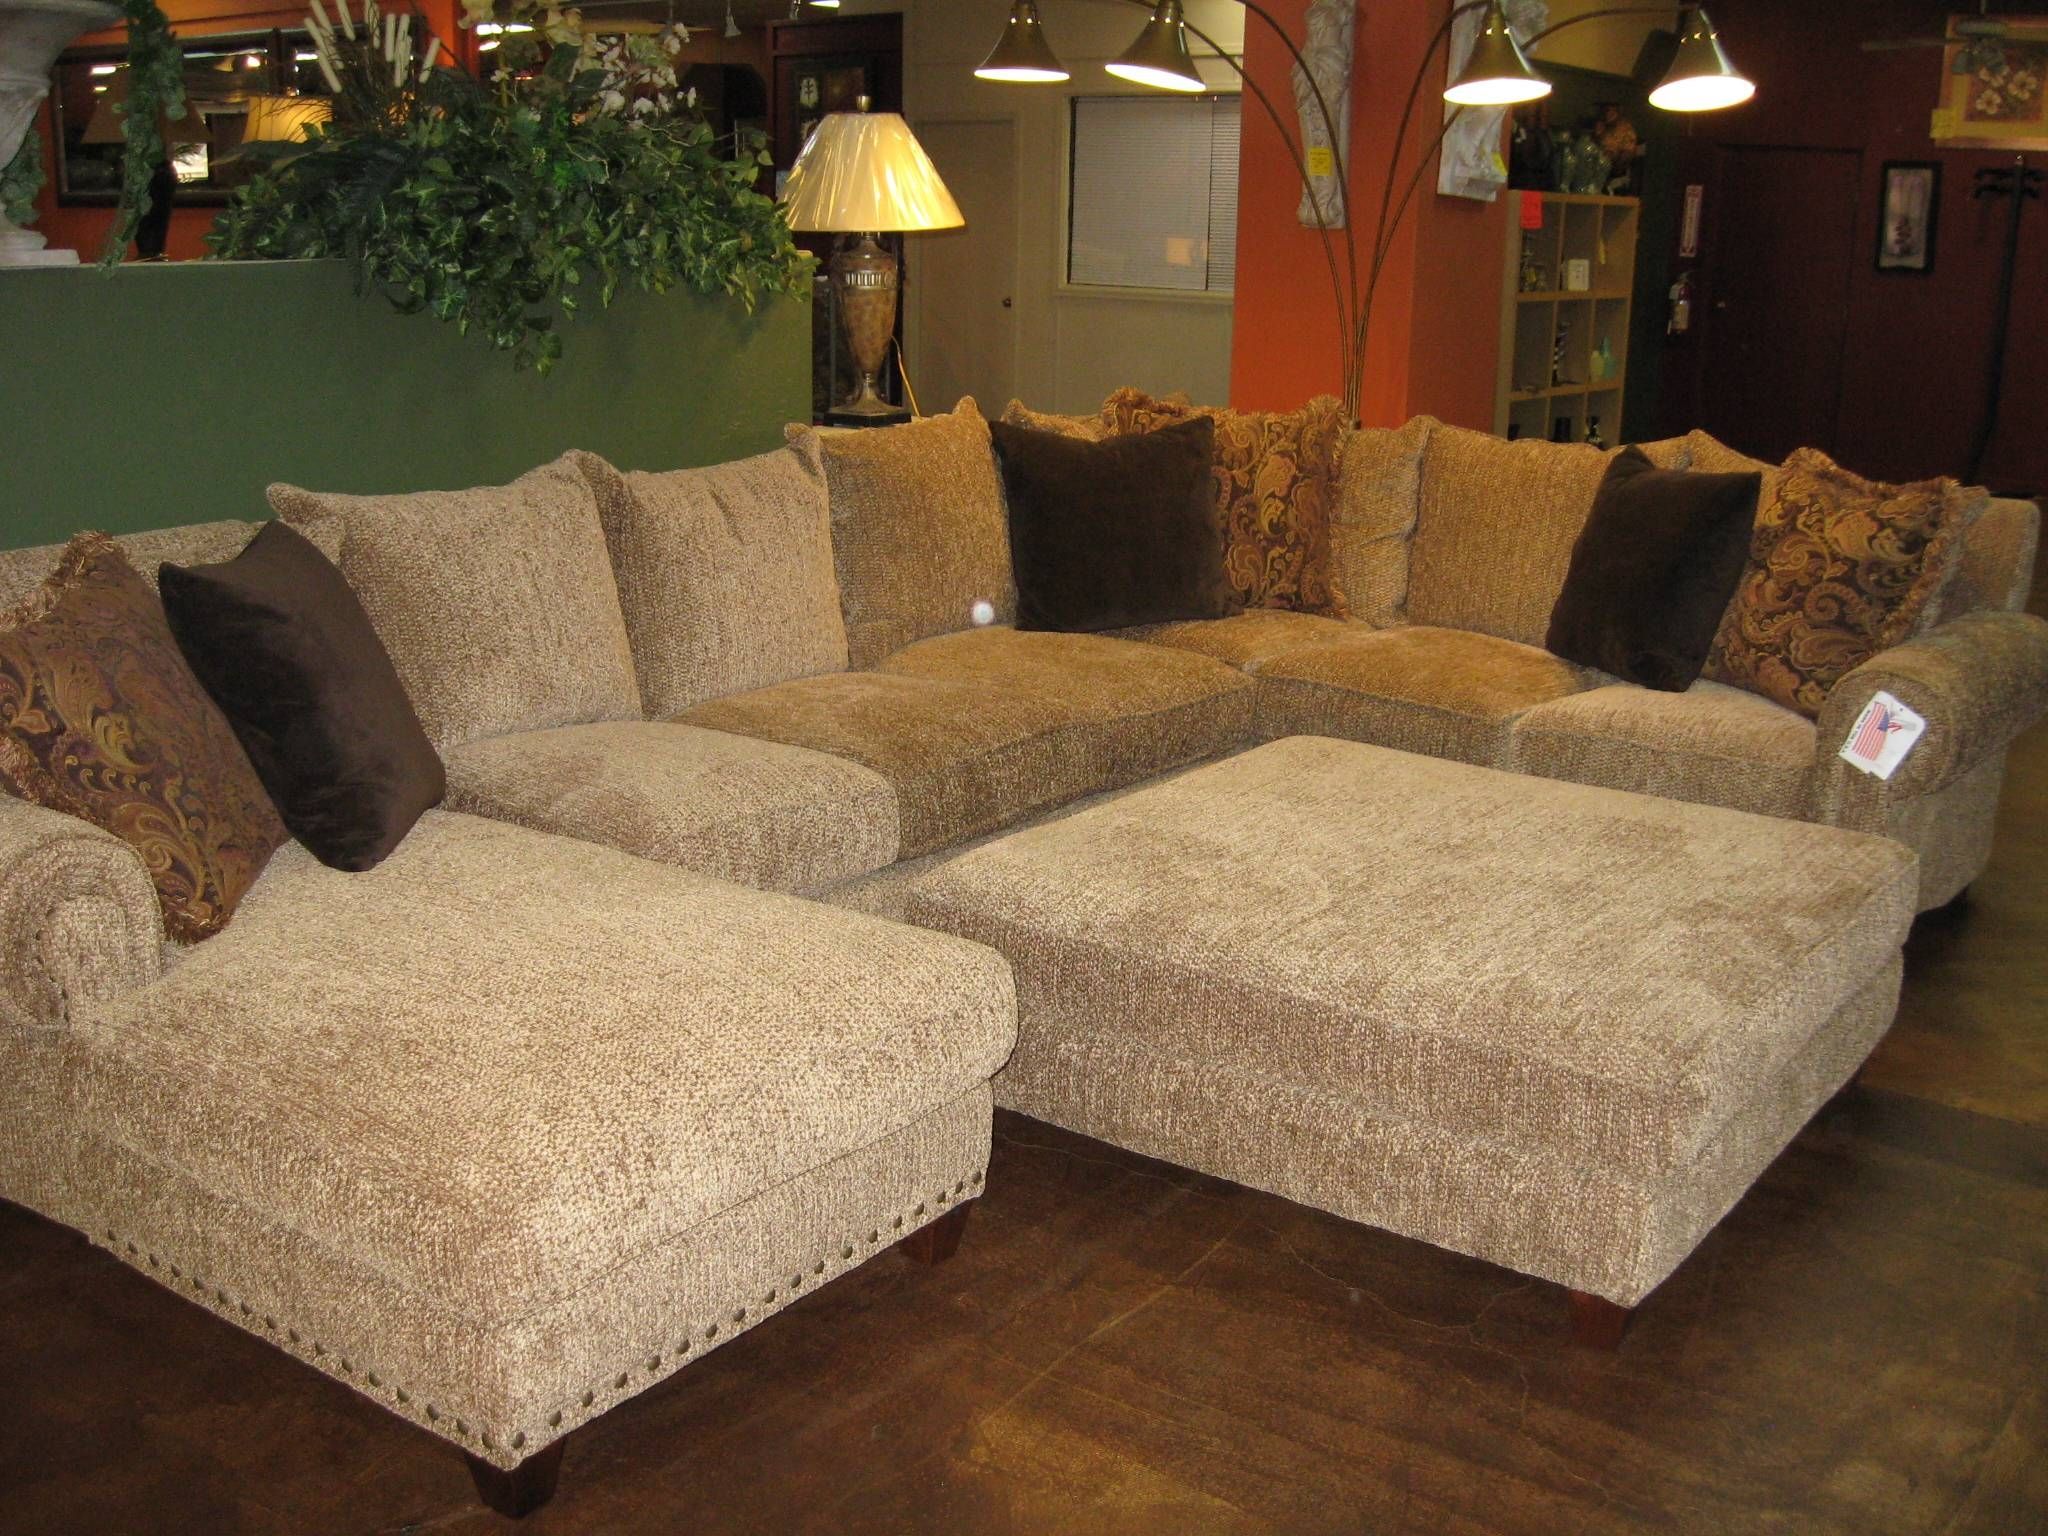 30 Inspirations of Sectional Sofa With Oversized Ottoman